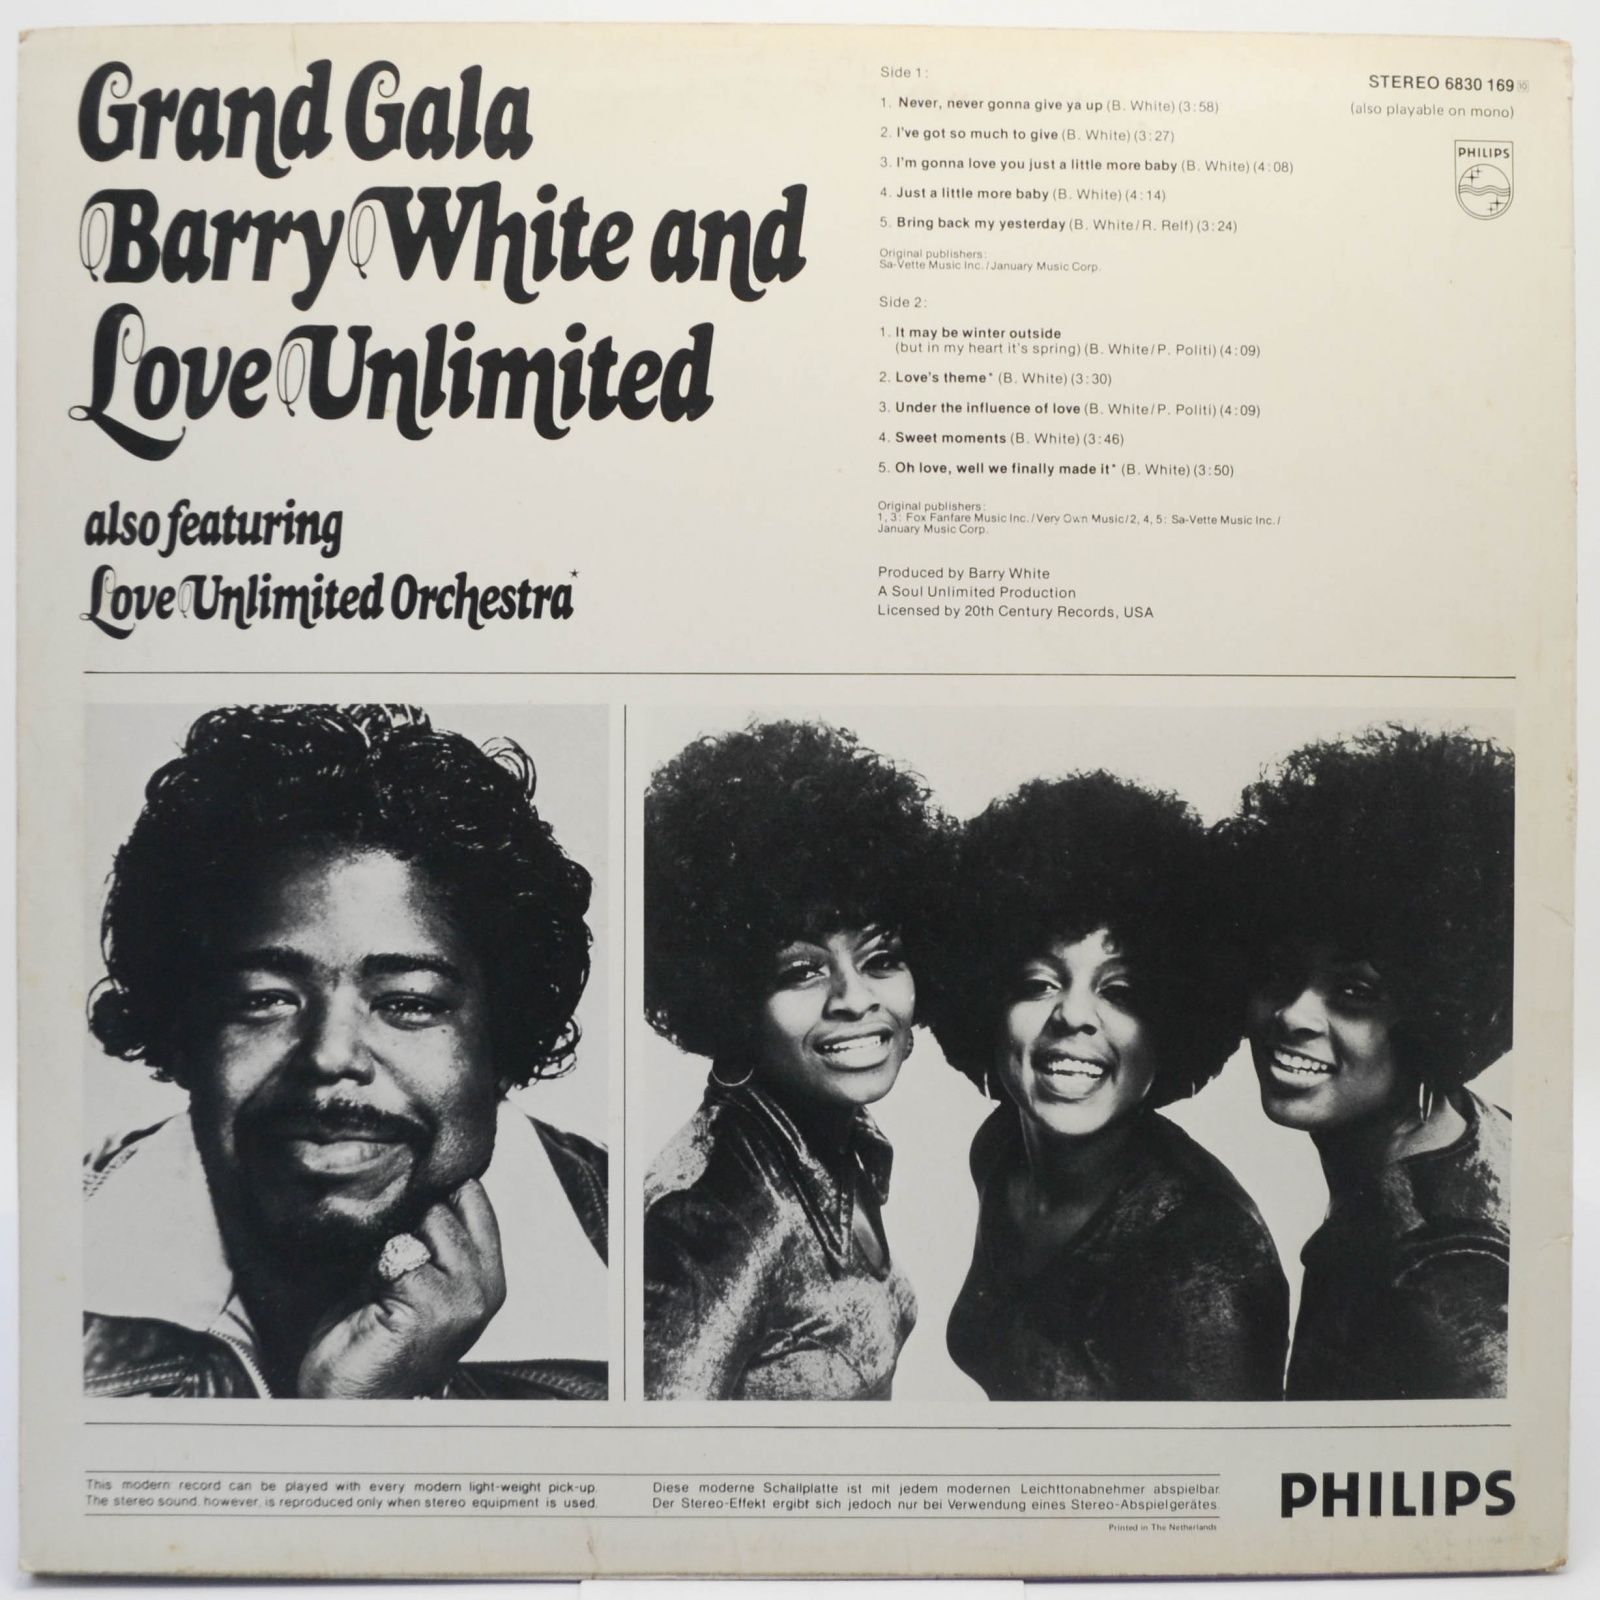 Barry White And Love Unlimited Also Featuring Love Unlimited Orchestra — Grand Gala, 1973